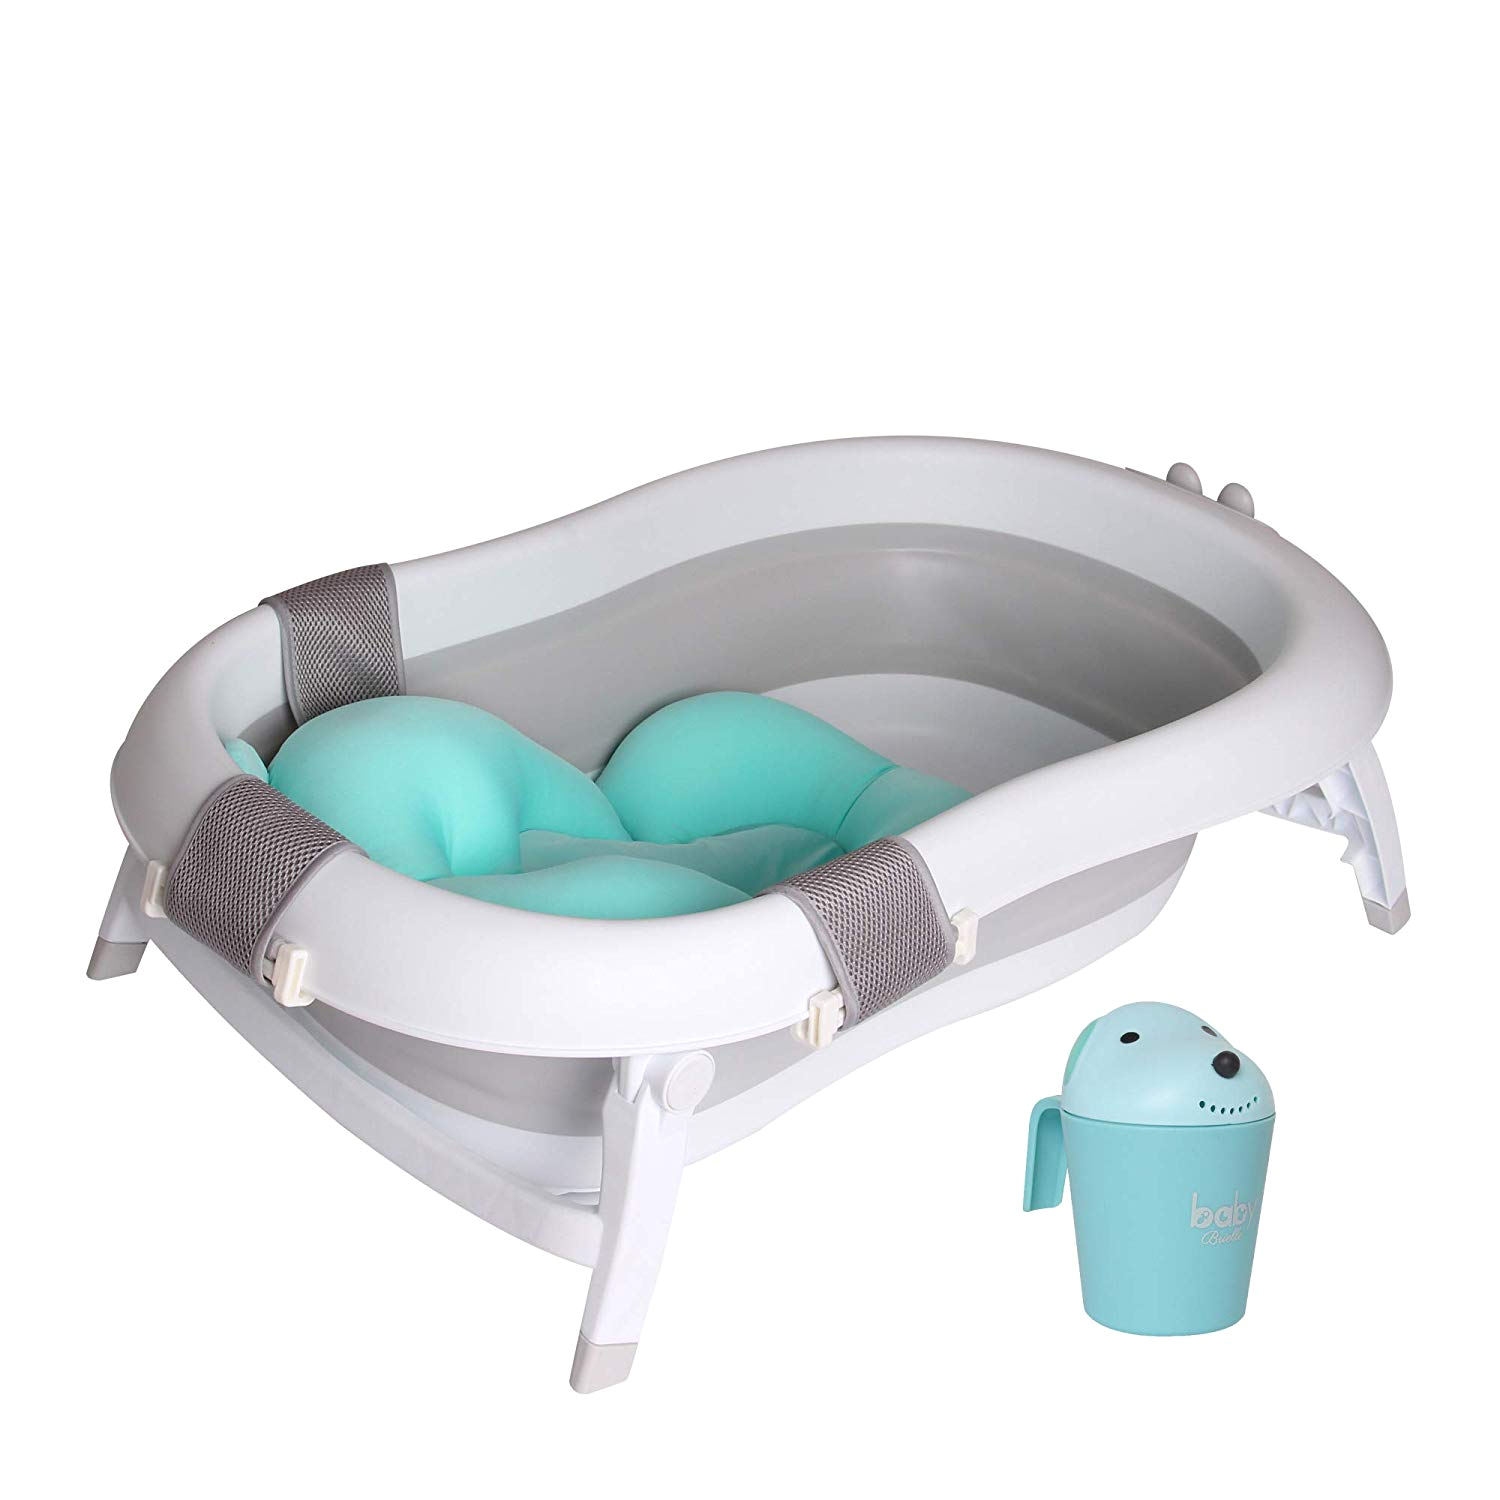 baby brielle 3 in 1 portable collapsible temperature sensor infant to toddler space saver foldable bathtub anti slip skid proof with newborn cushion mat insert with water rinser cup for bathing c